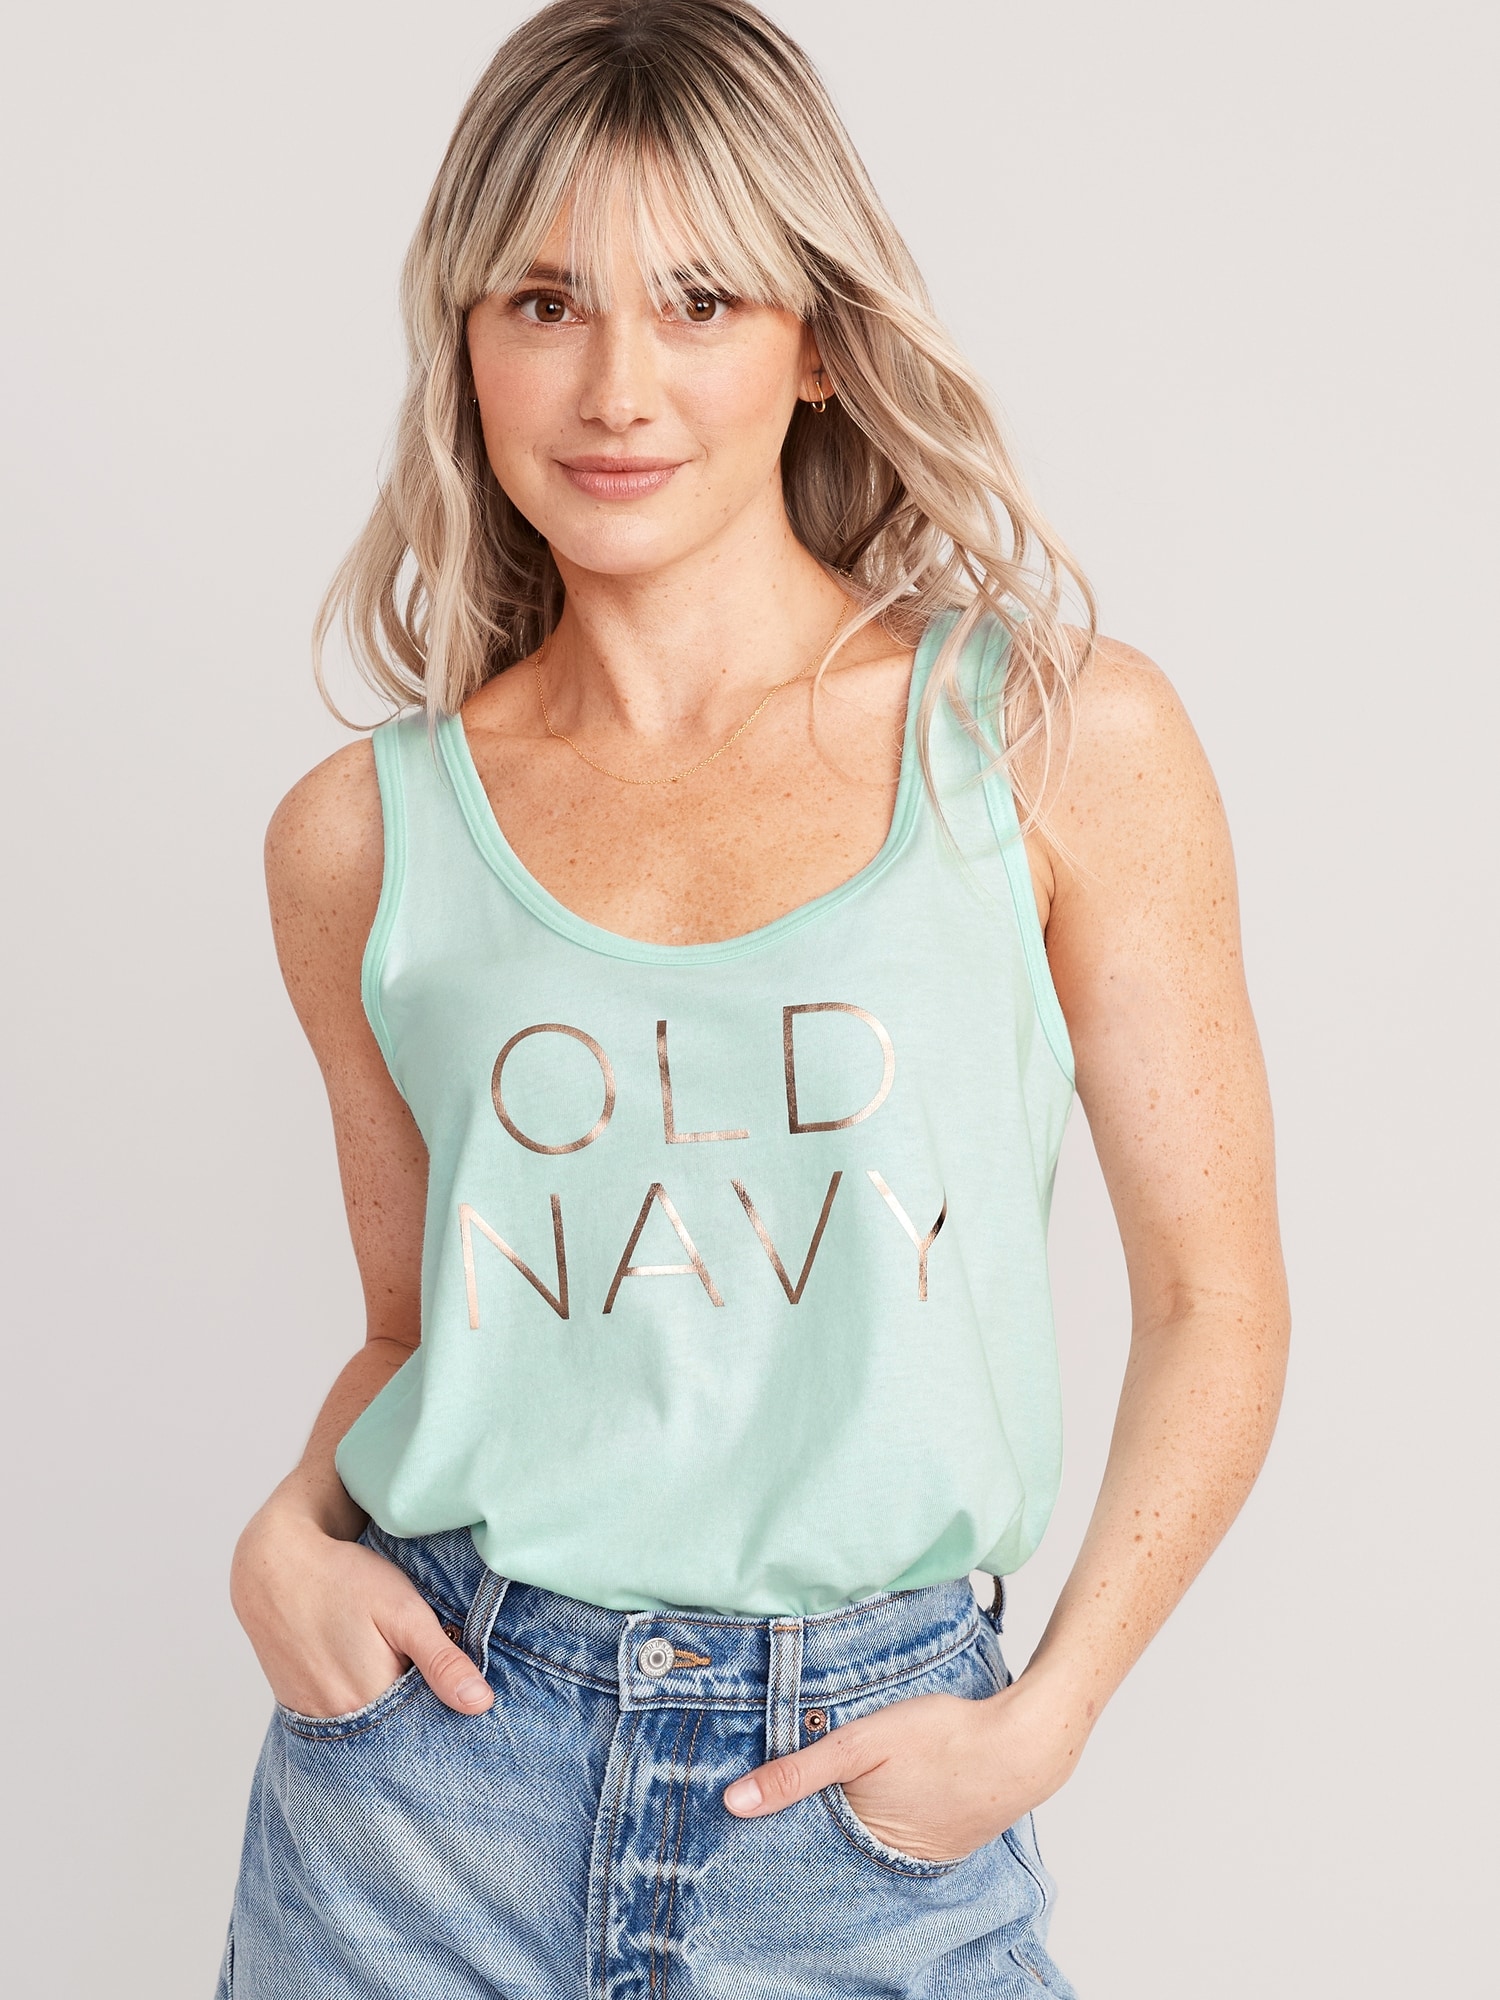 Old Navy Logo Graphic Tank Top for Women blue - 655301032